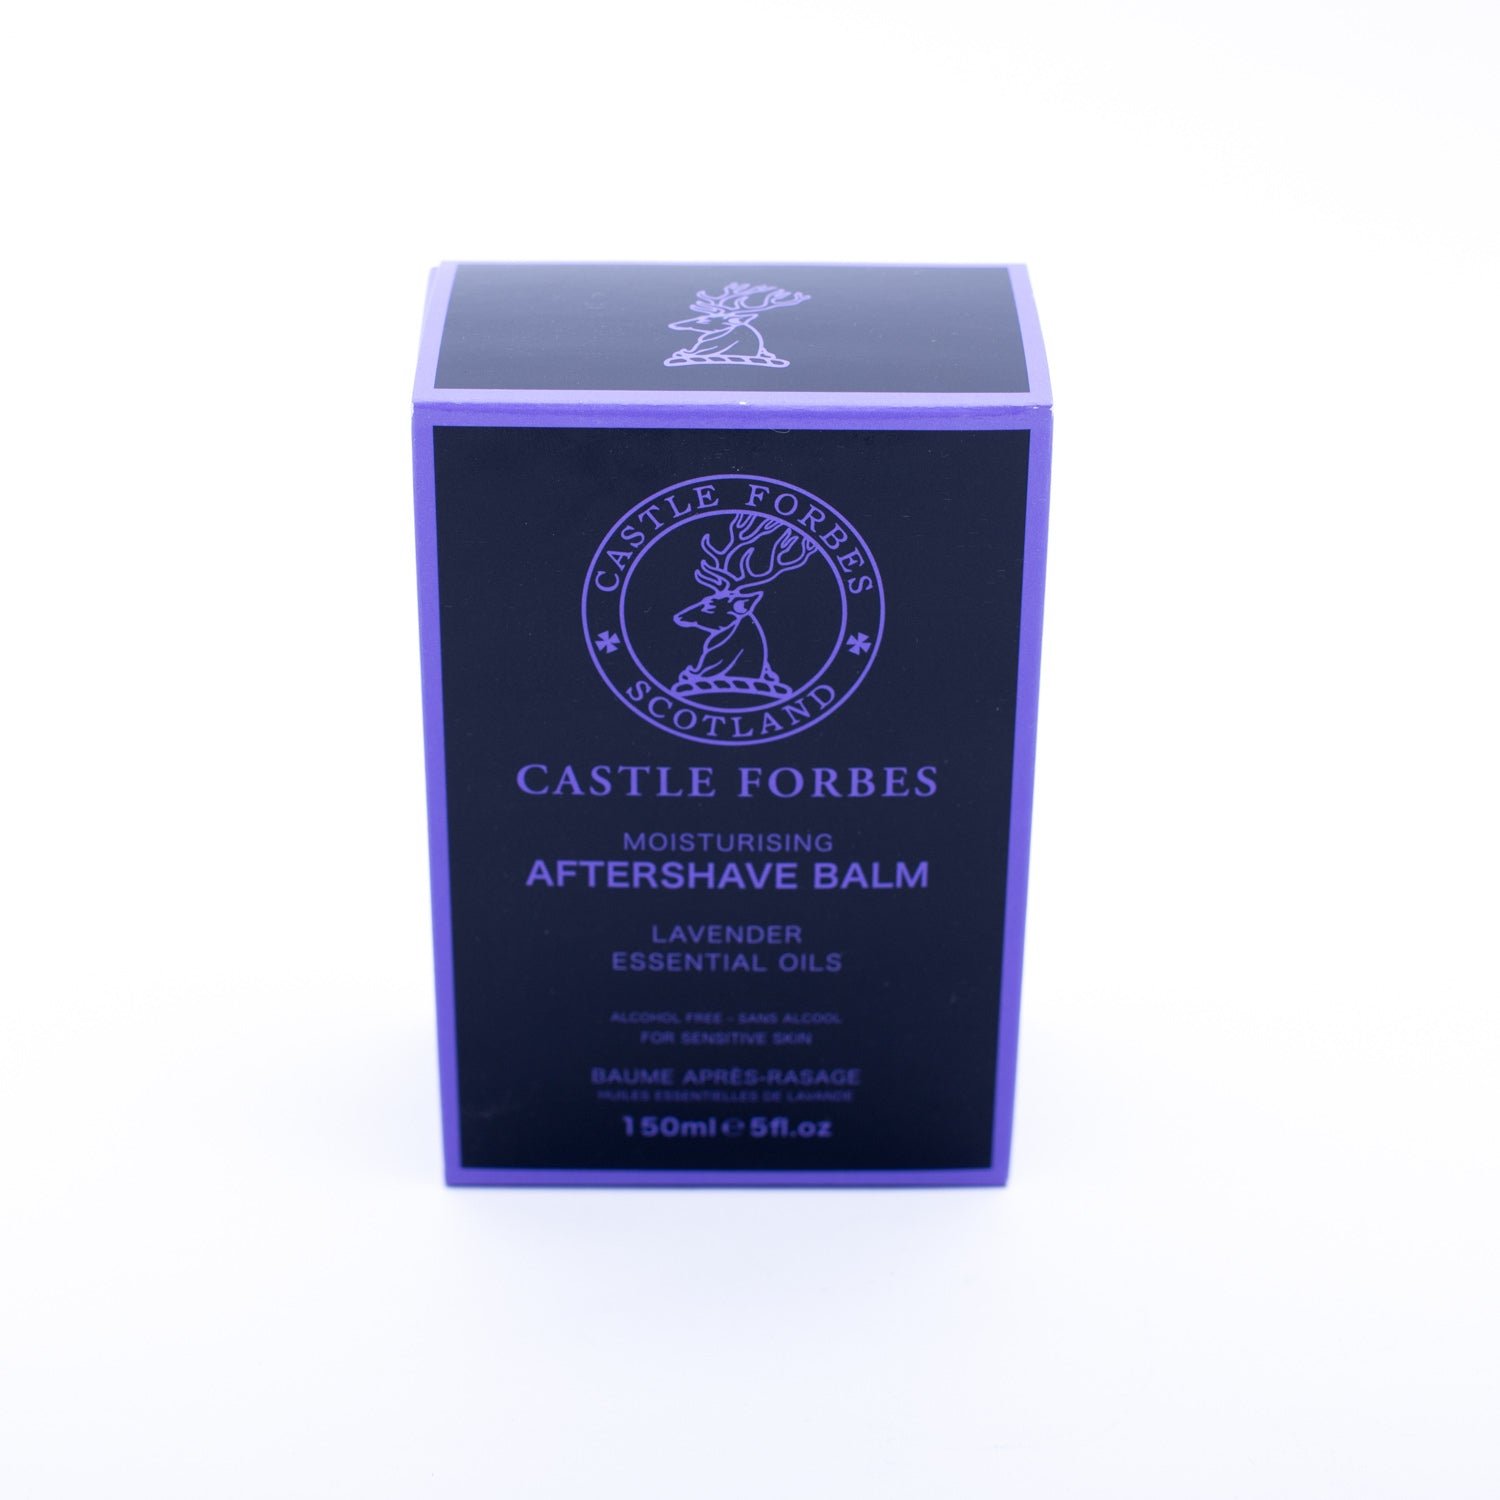 KirbyAllison.com's Castle Forbes Lavender Essential Aftershave Balm is an alcohol-free balm designed to moisturize and soothe the skin, featuring witch hazel.